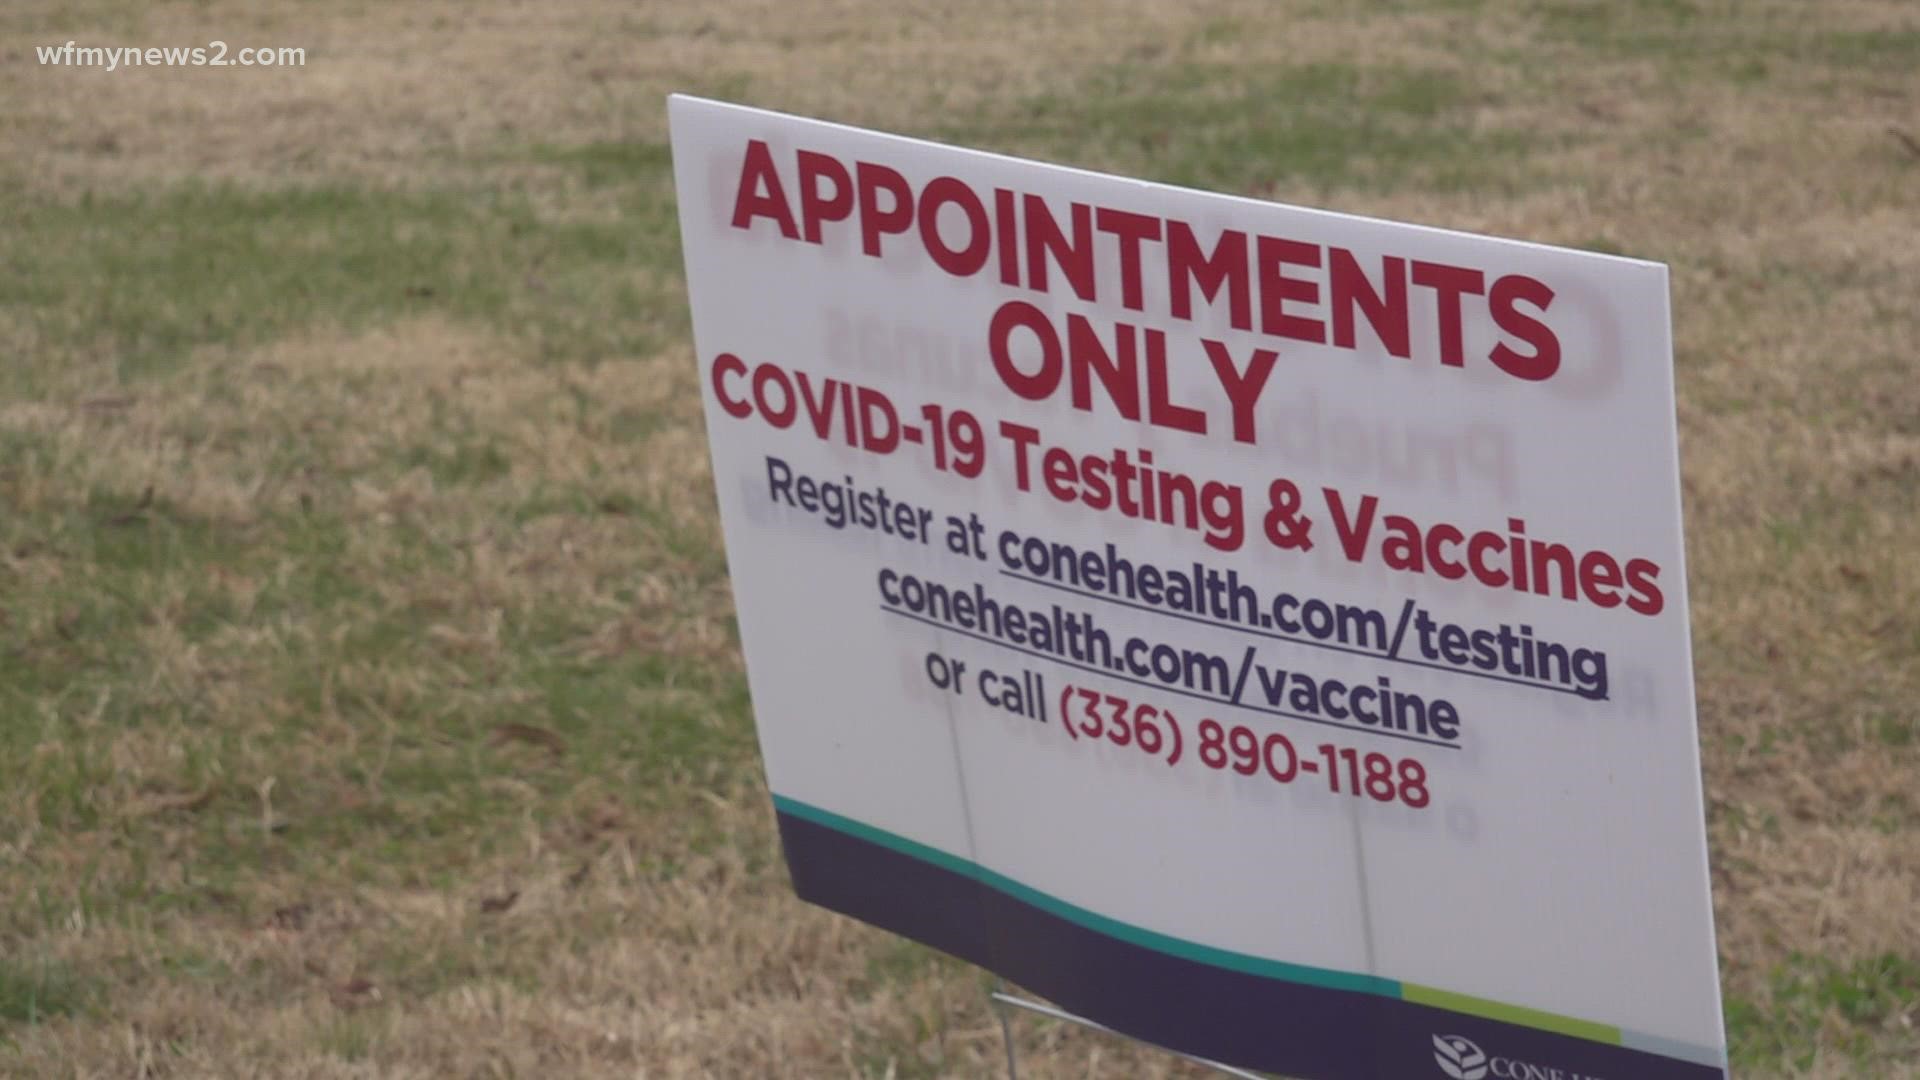 Cone Health is seeing a rise in COVID-19 testing but explains that's a good thing. Now is the best time to get tested.